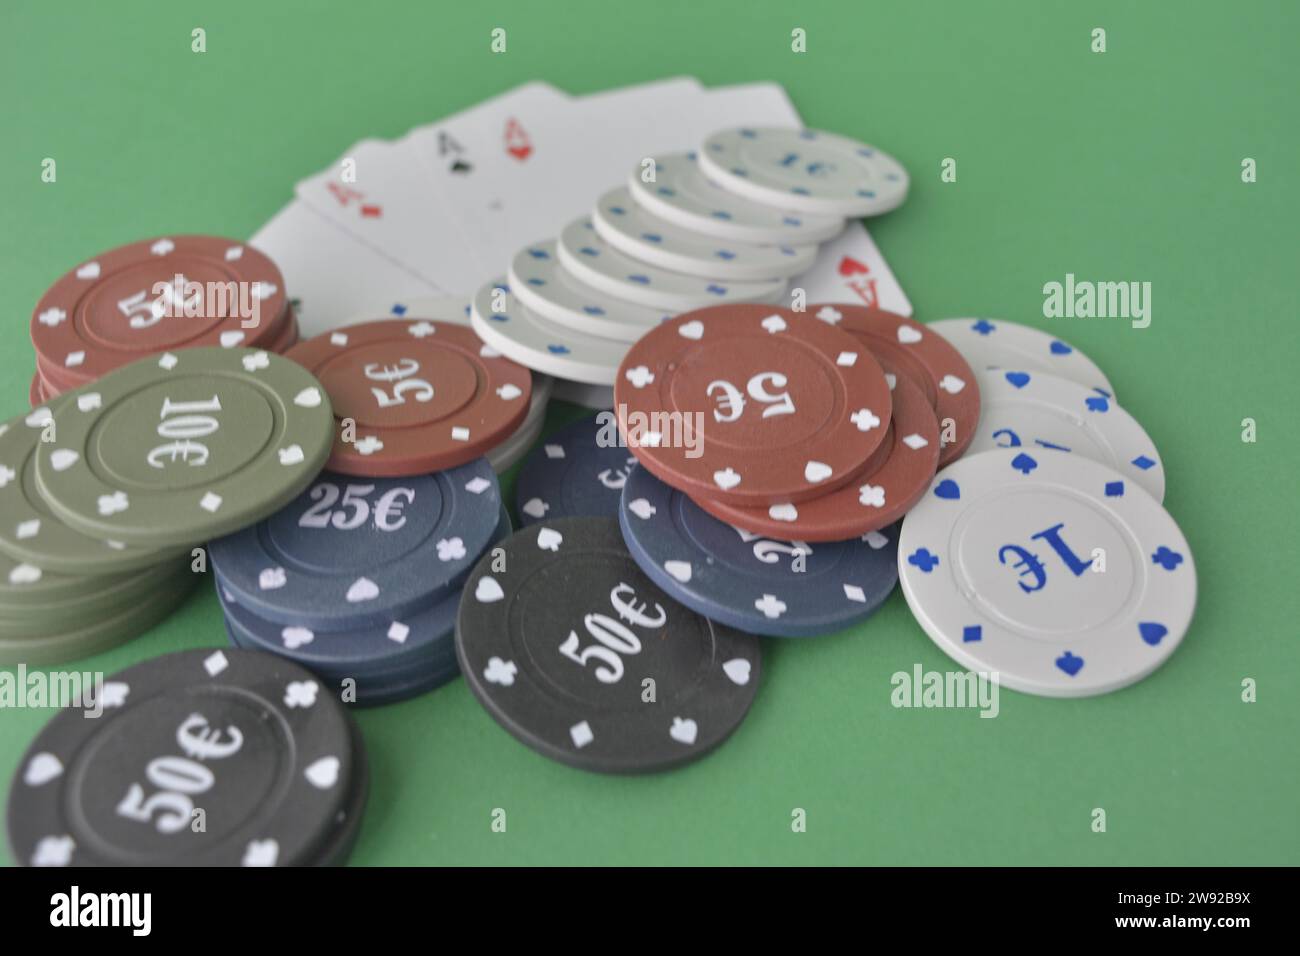 Stacks of poker chips and a fan of playing cards on a green felt gaming table, poker cards and chips Stock Photo